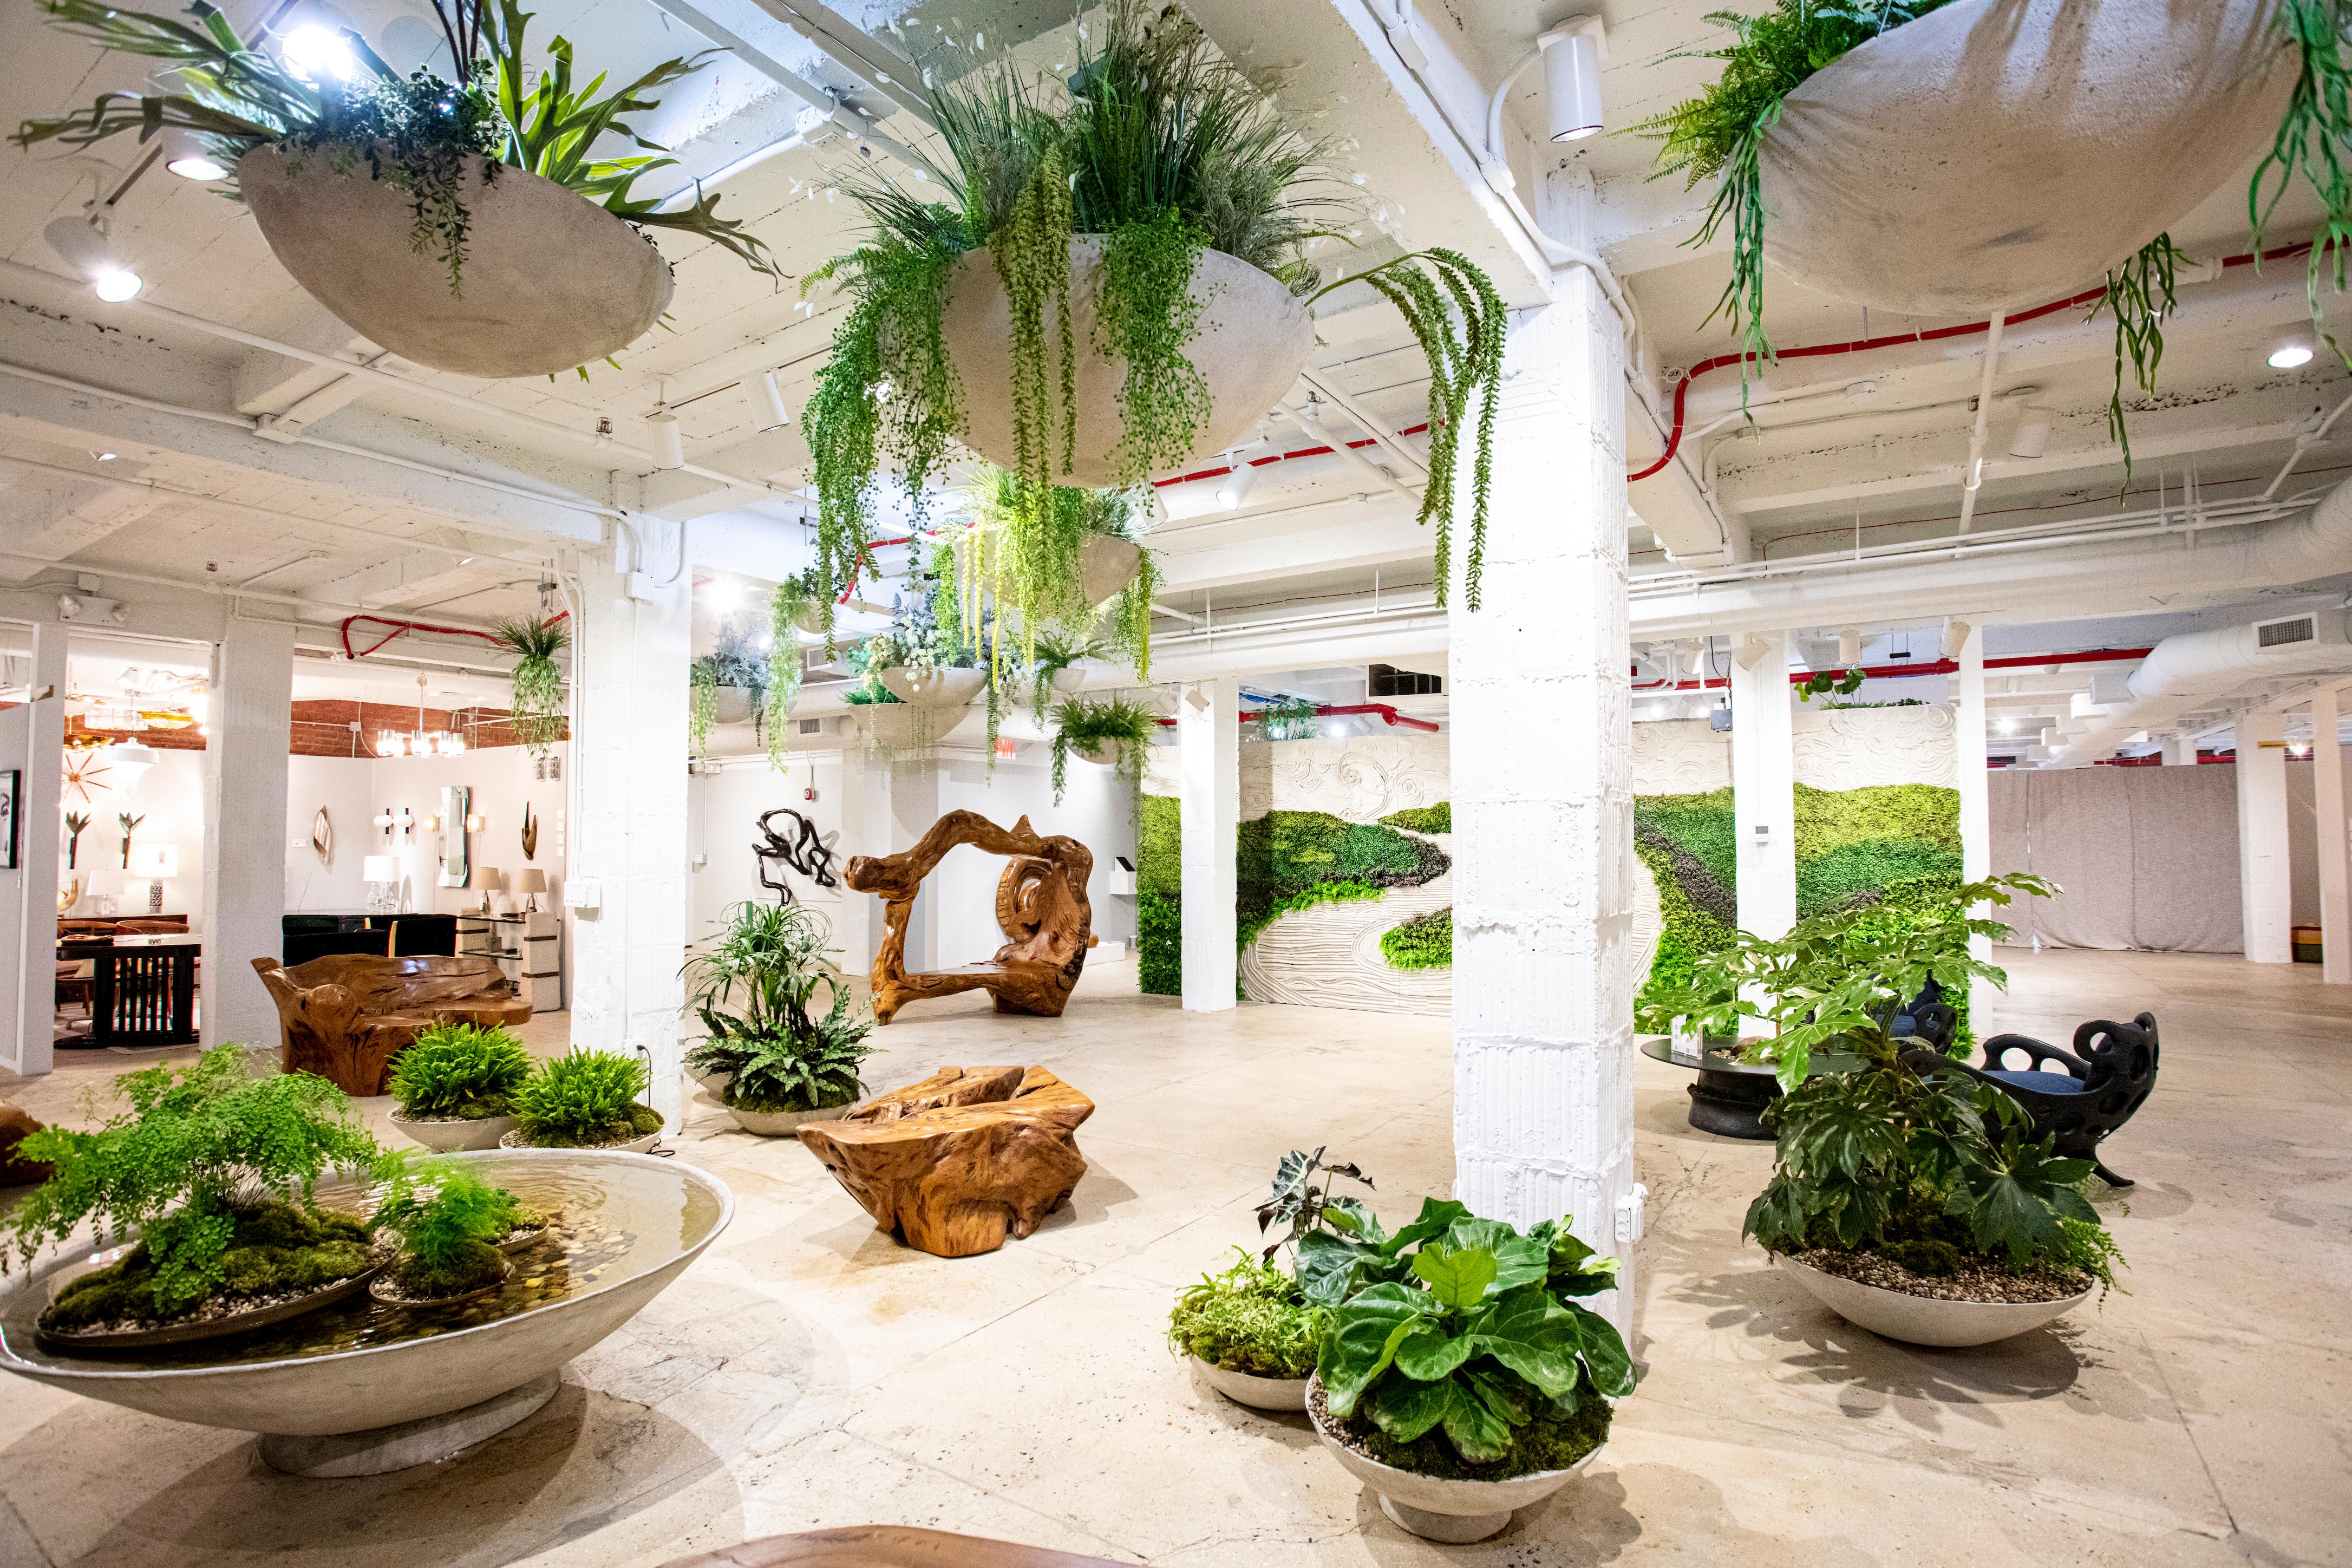 Opiary is a Brooklyn-based biophilic design and production studio. We integrate nature in each of our designs, incorporating live greenery and organic shapes into bespoke furniture, planters, and sculpture. Through the ethos of biophilia, our